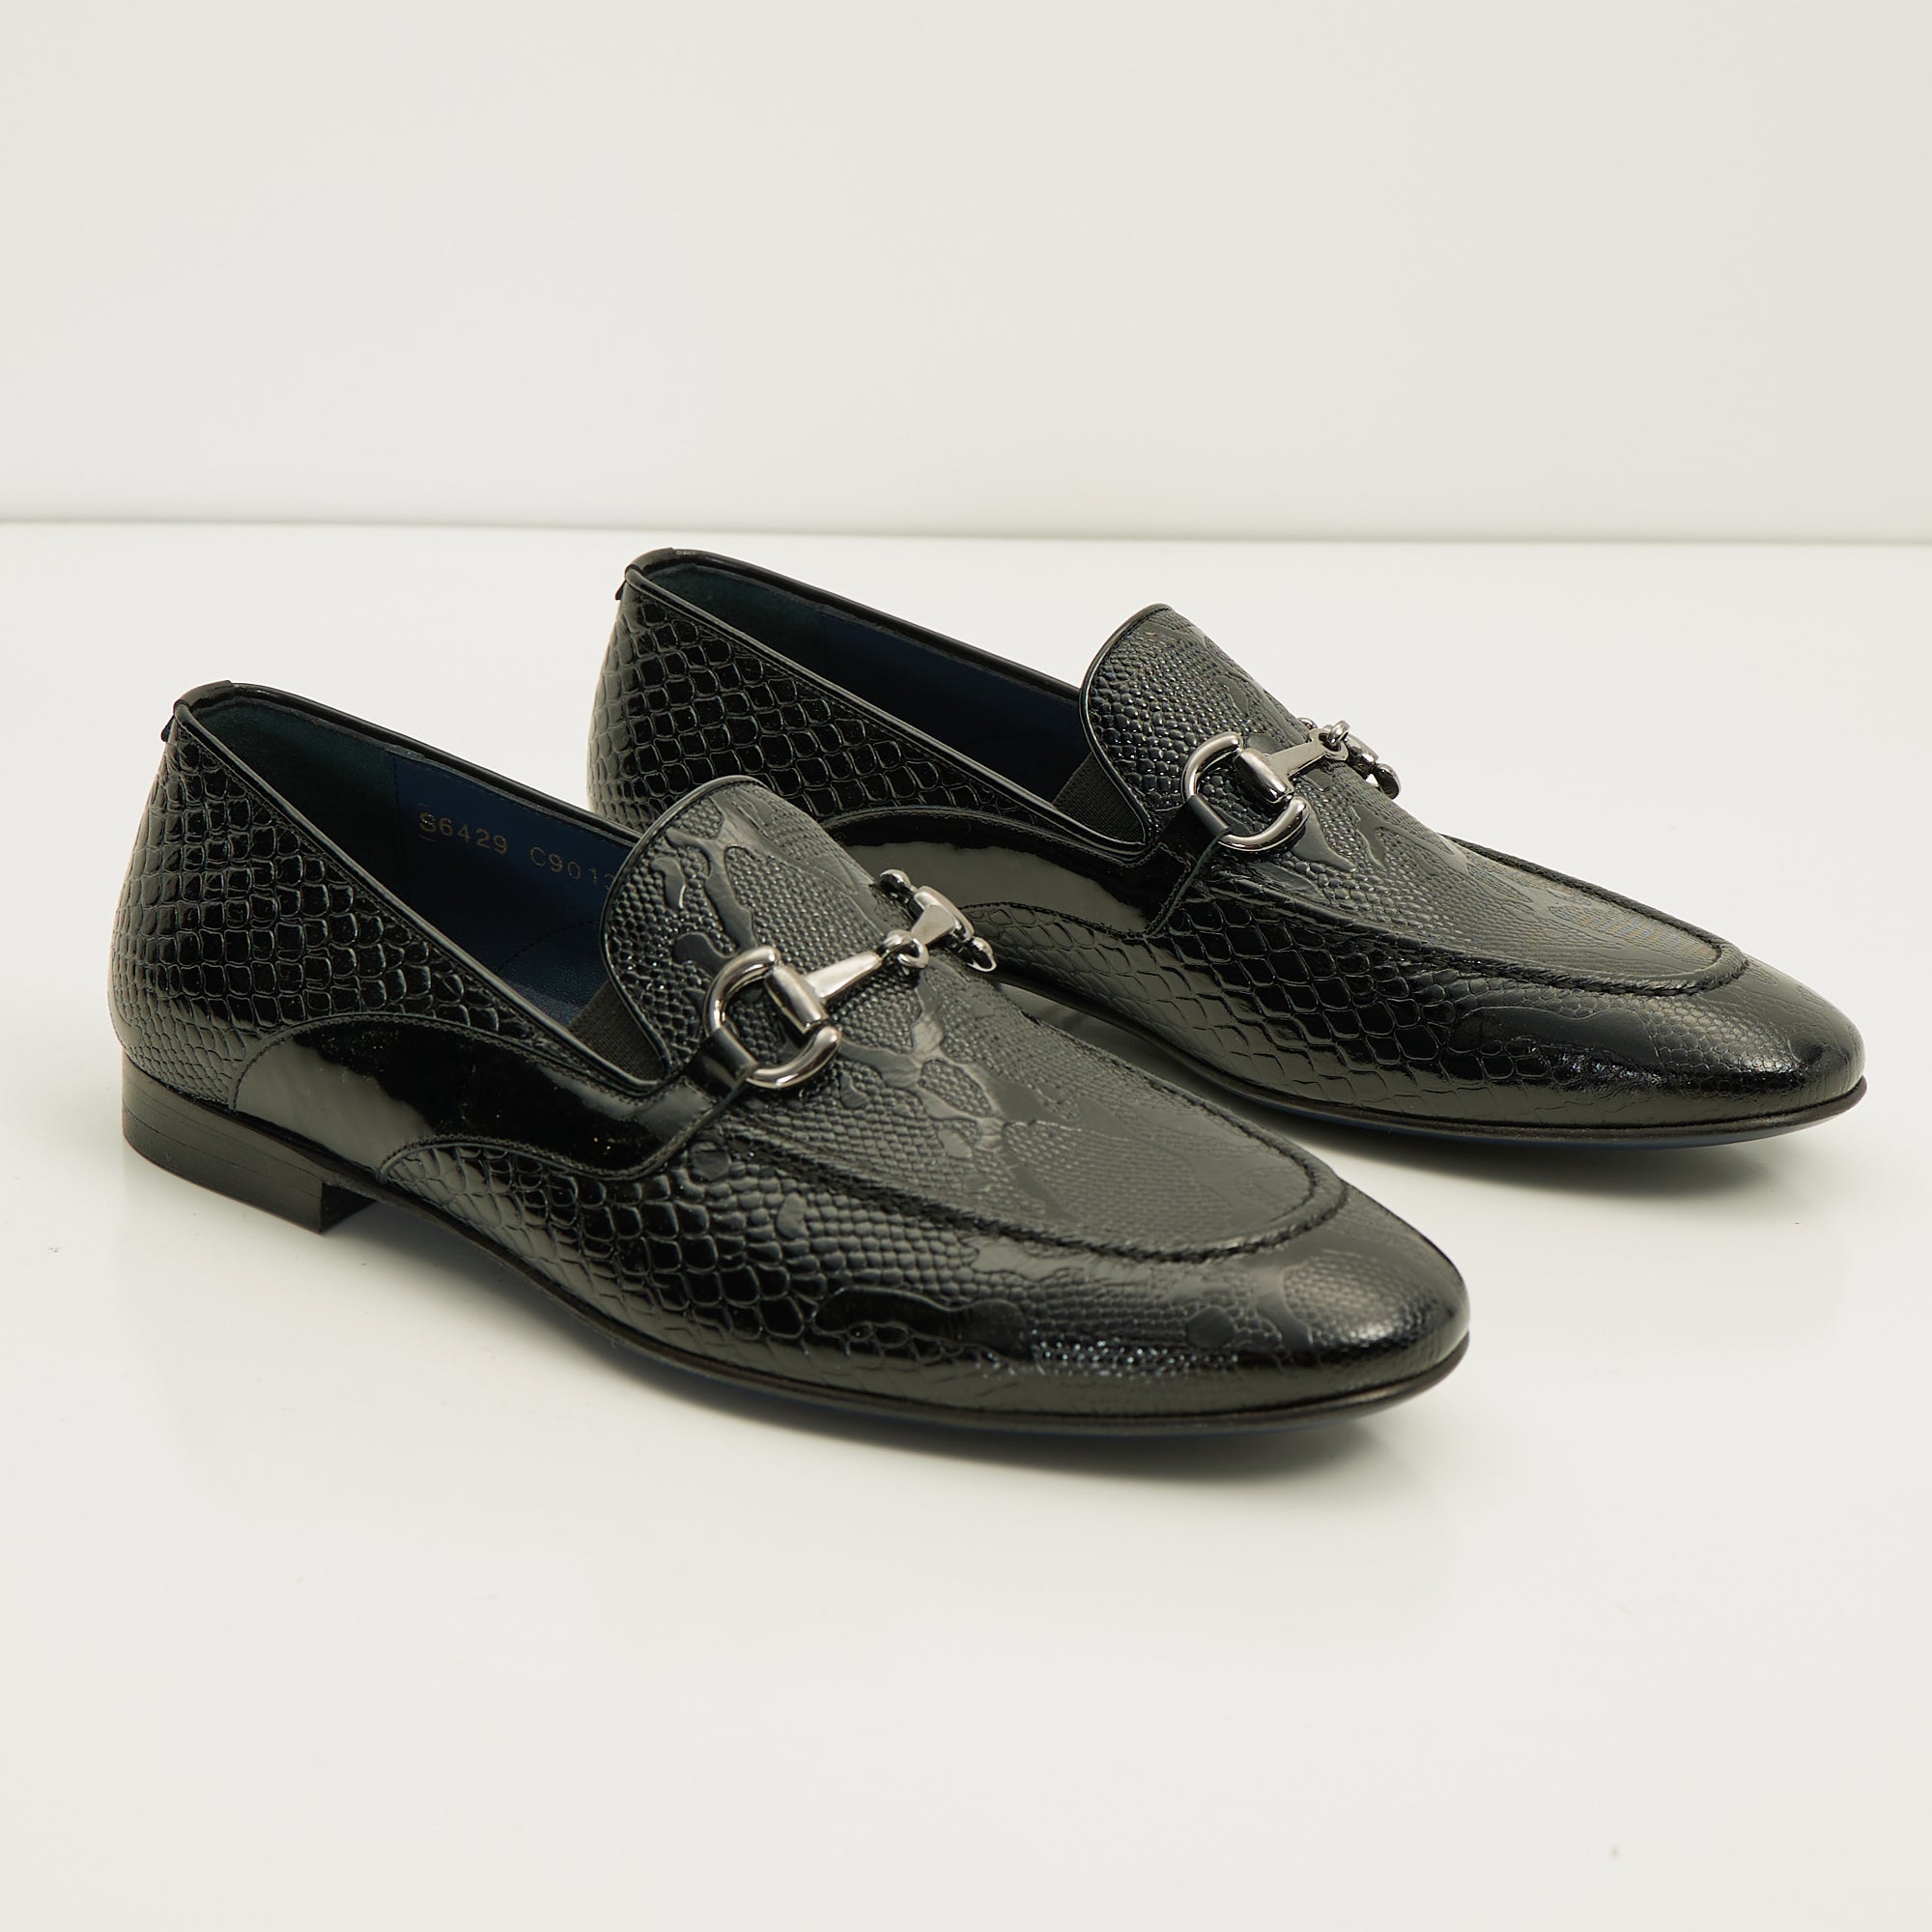 N° C9013X SNAKE EMBOSSED LEATHER AND SILVER METAL BIT LOAFER